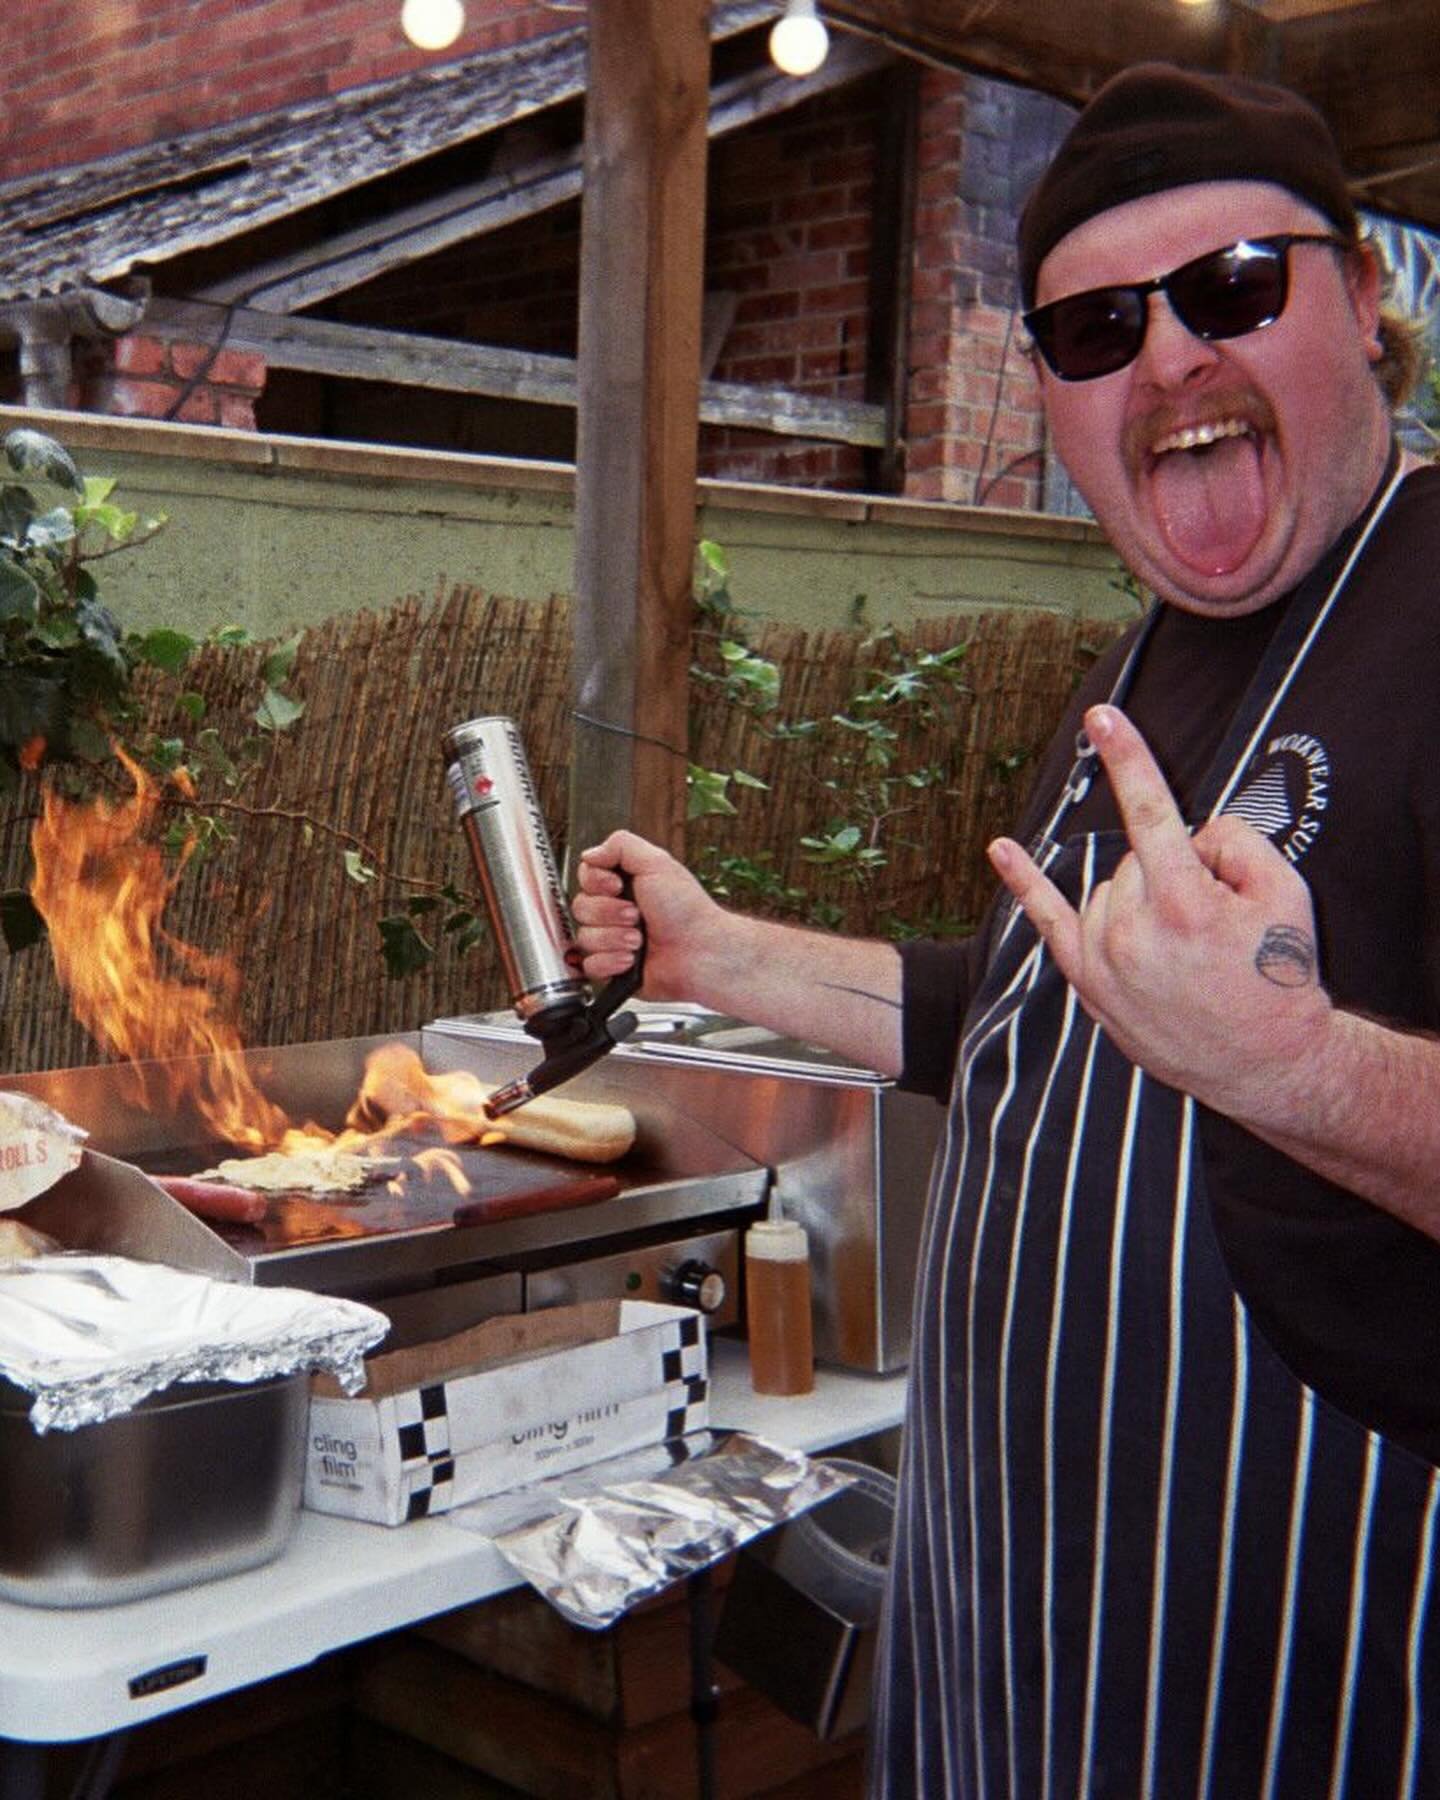 It&rsquo;s our first BBQ Garden Party of the season 🌞 and we have our pal Ryan (aka Mr Wrongun&rsquo;s) firing up the grill with &pound;3 glizzys 🌭 - come rain or shine we have you (and the garden) fully covered with music broadcasting inside and o